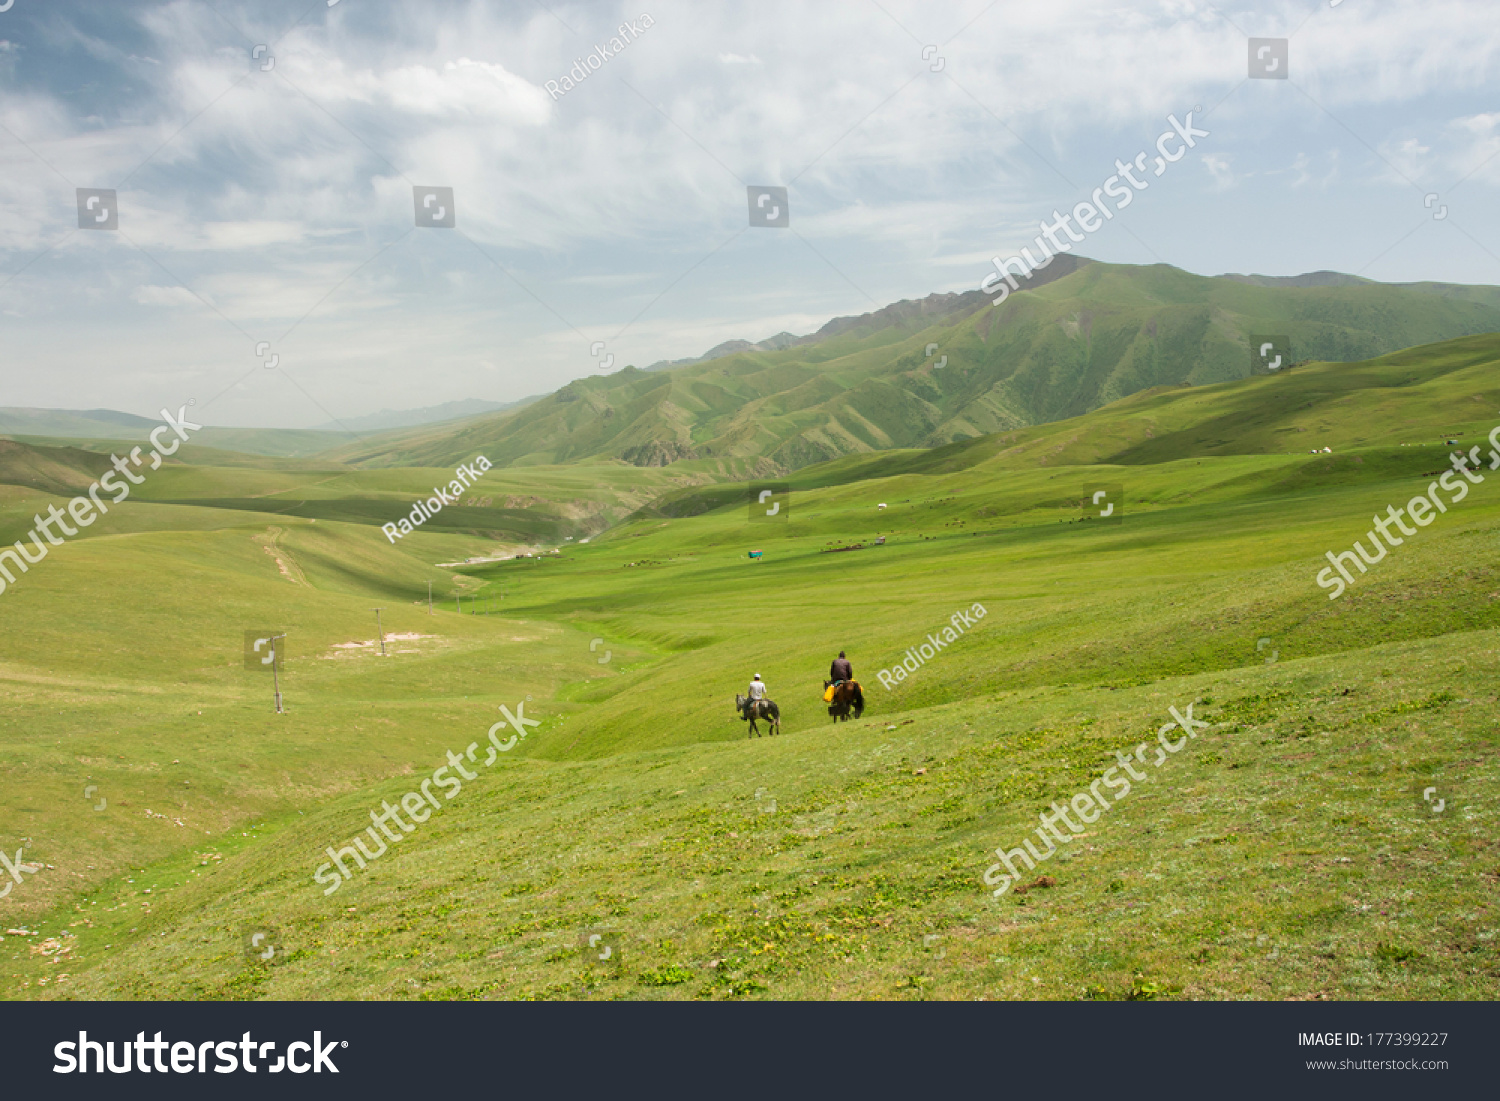 Mountain landscape with green grass valley and riders on horseback under white clouds sky #177399227